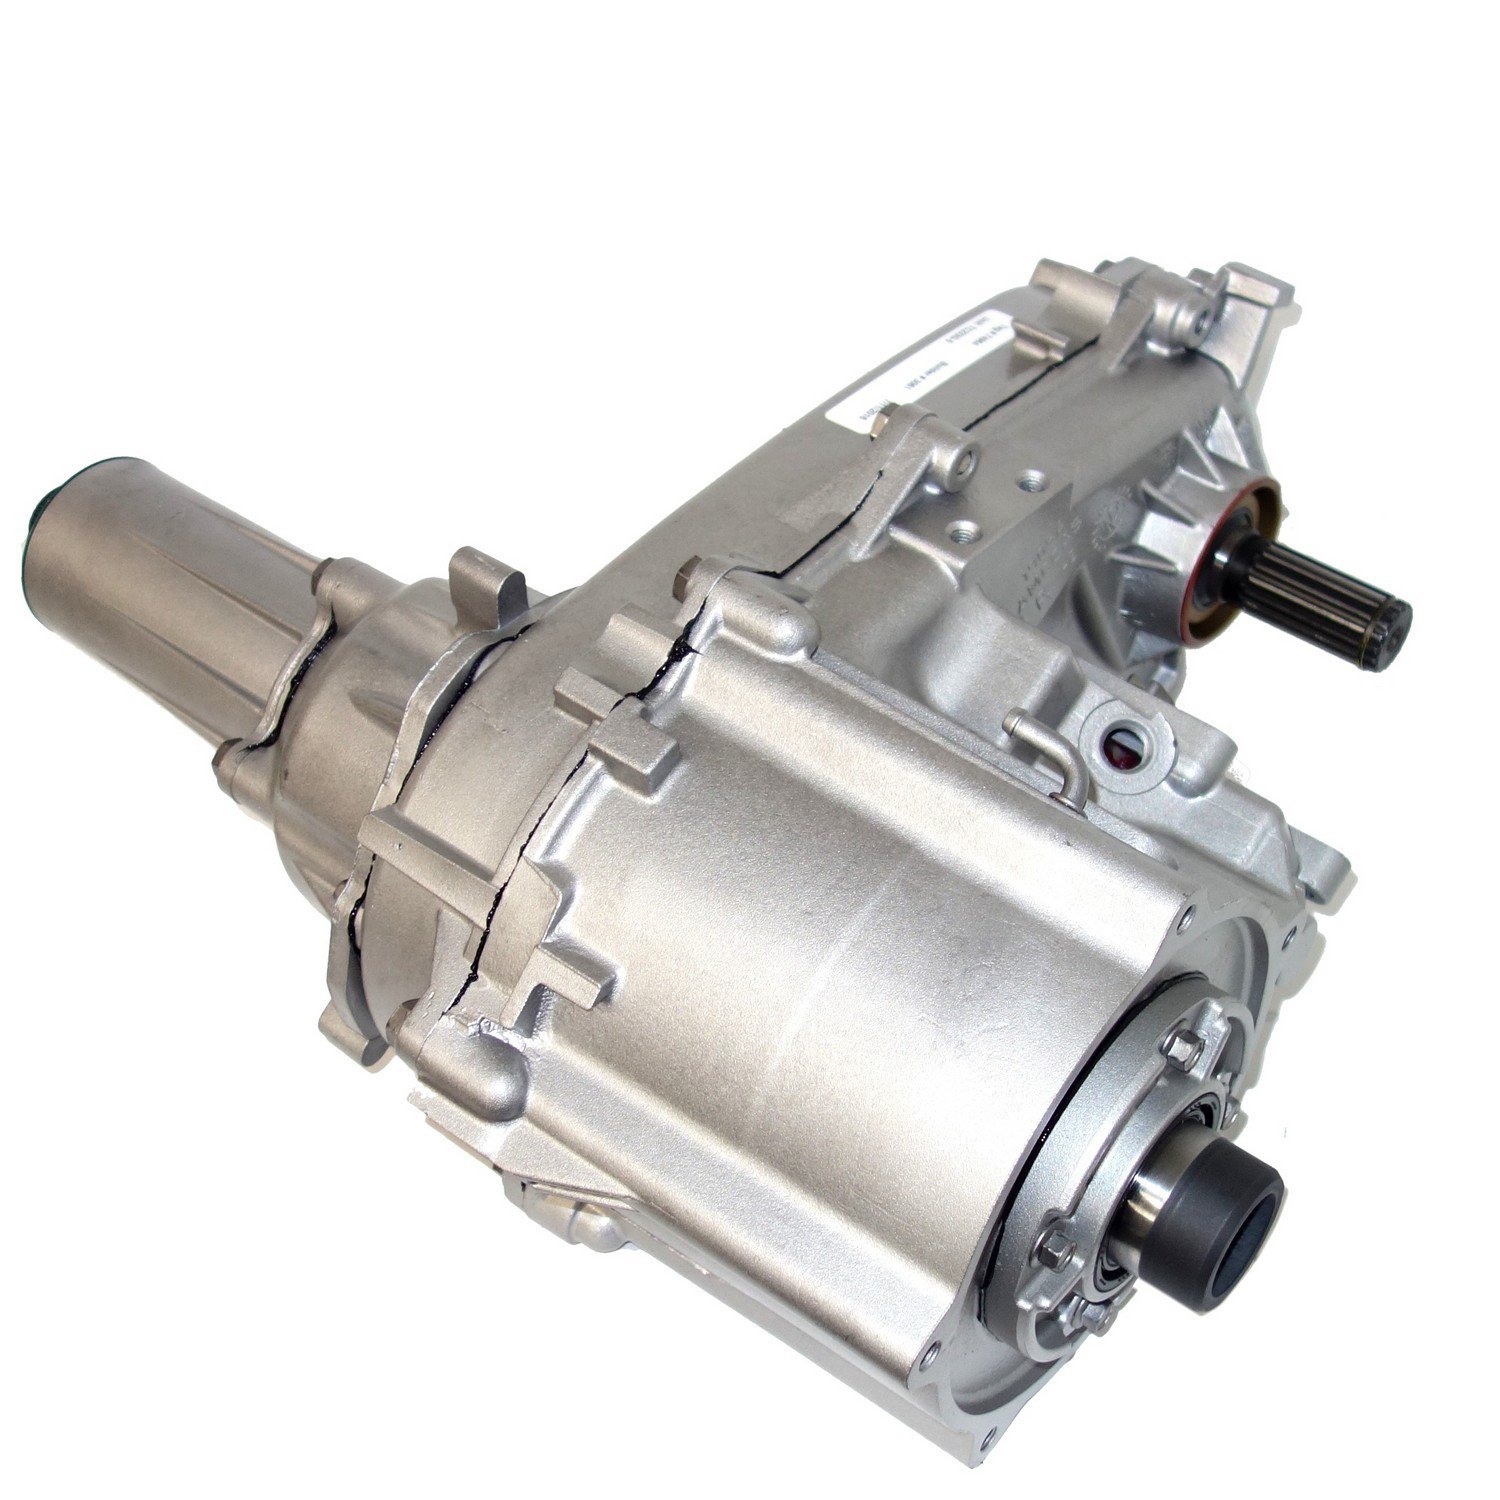 Remanufactured NP233 Transfer Case for GM 92-94 S10 & S15